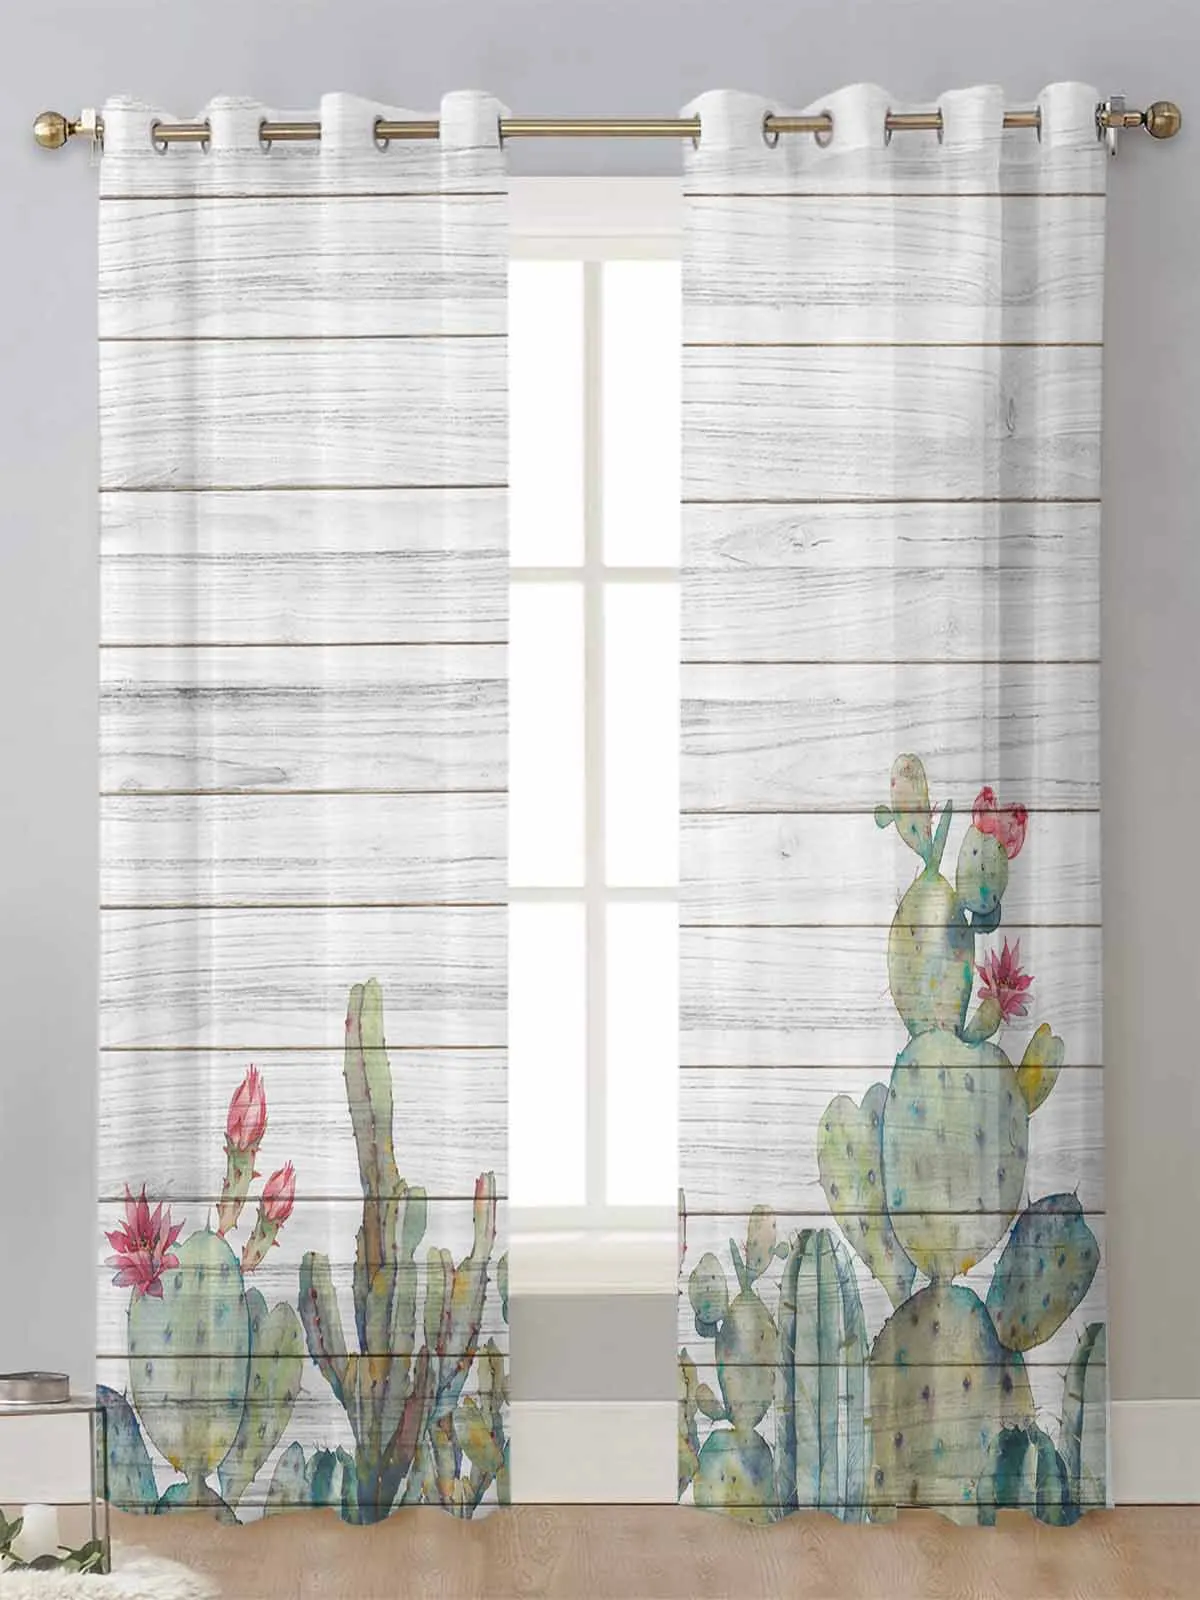 

Cactus Tropical Plant Wood Board Texture Sheer Curtains For Living Room Window Voile Tulle Curtain Cortinas Drapes Home Decor